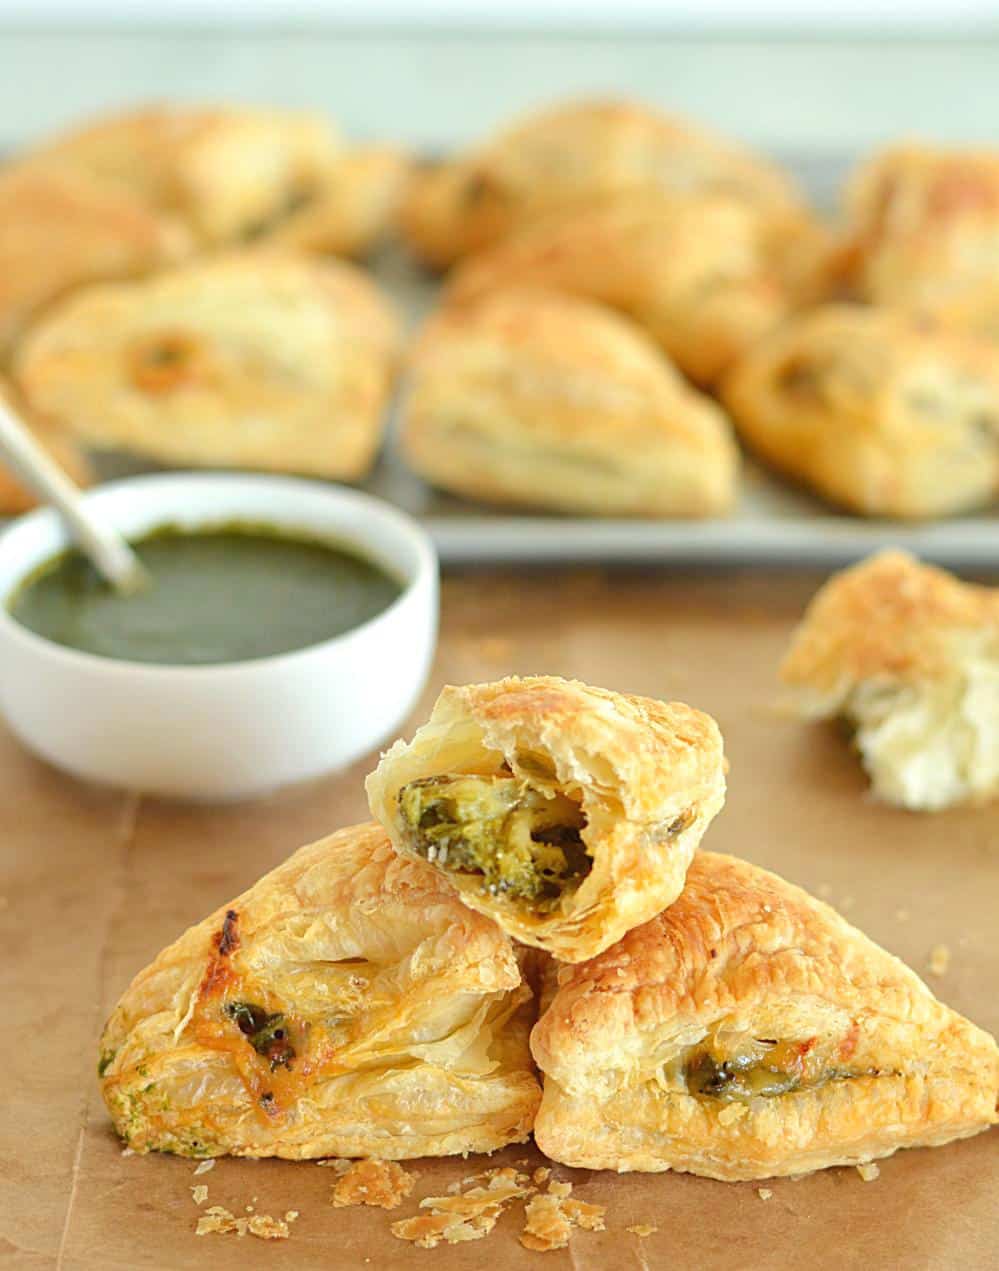 Cheesy Broccoli And Spinach Puffs | Spice up your party with these crispy and flaky Cheesy Broccoli And Spinach Puffs! | www.ruchiskitchen.com